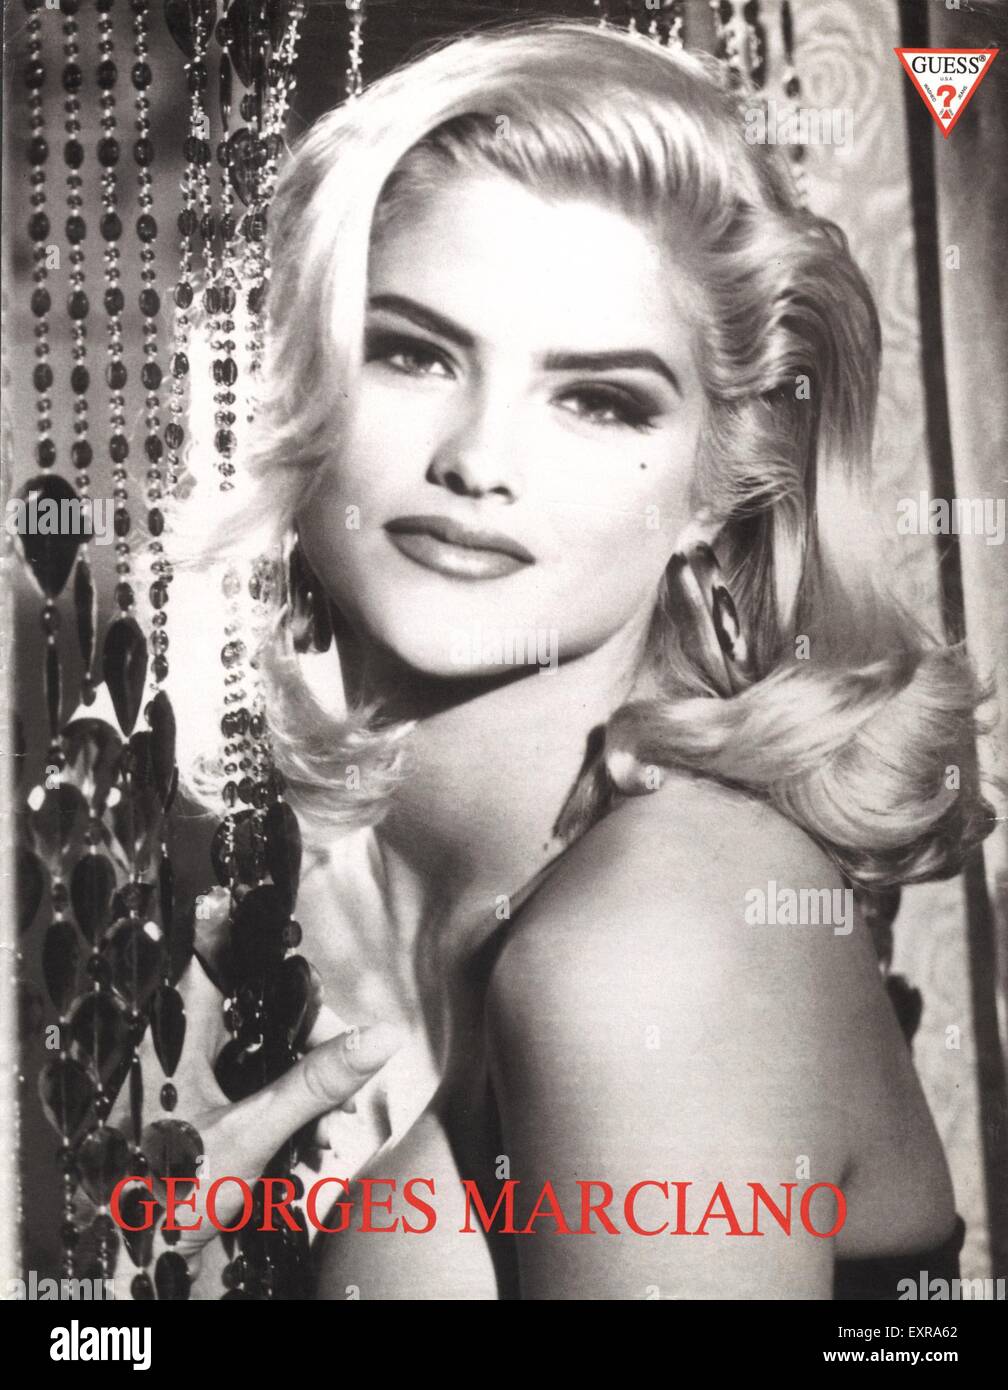 1990s UK Guess by Marciano Magazine Advert Stock Photo